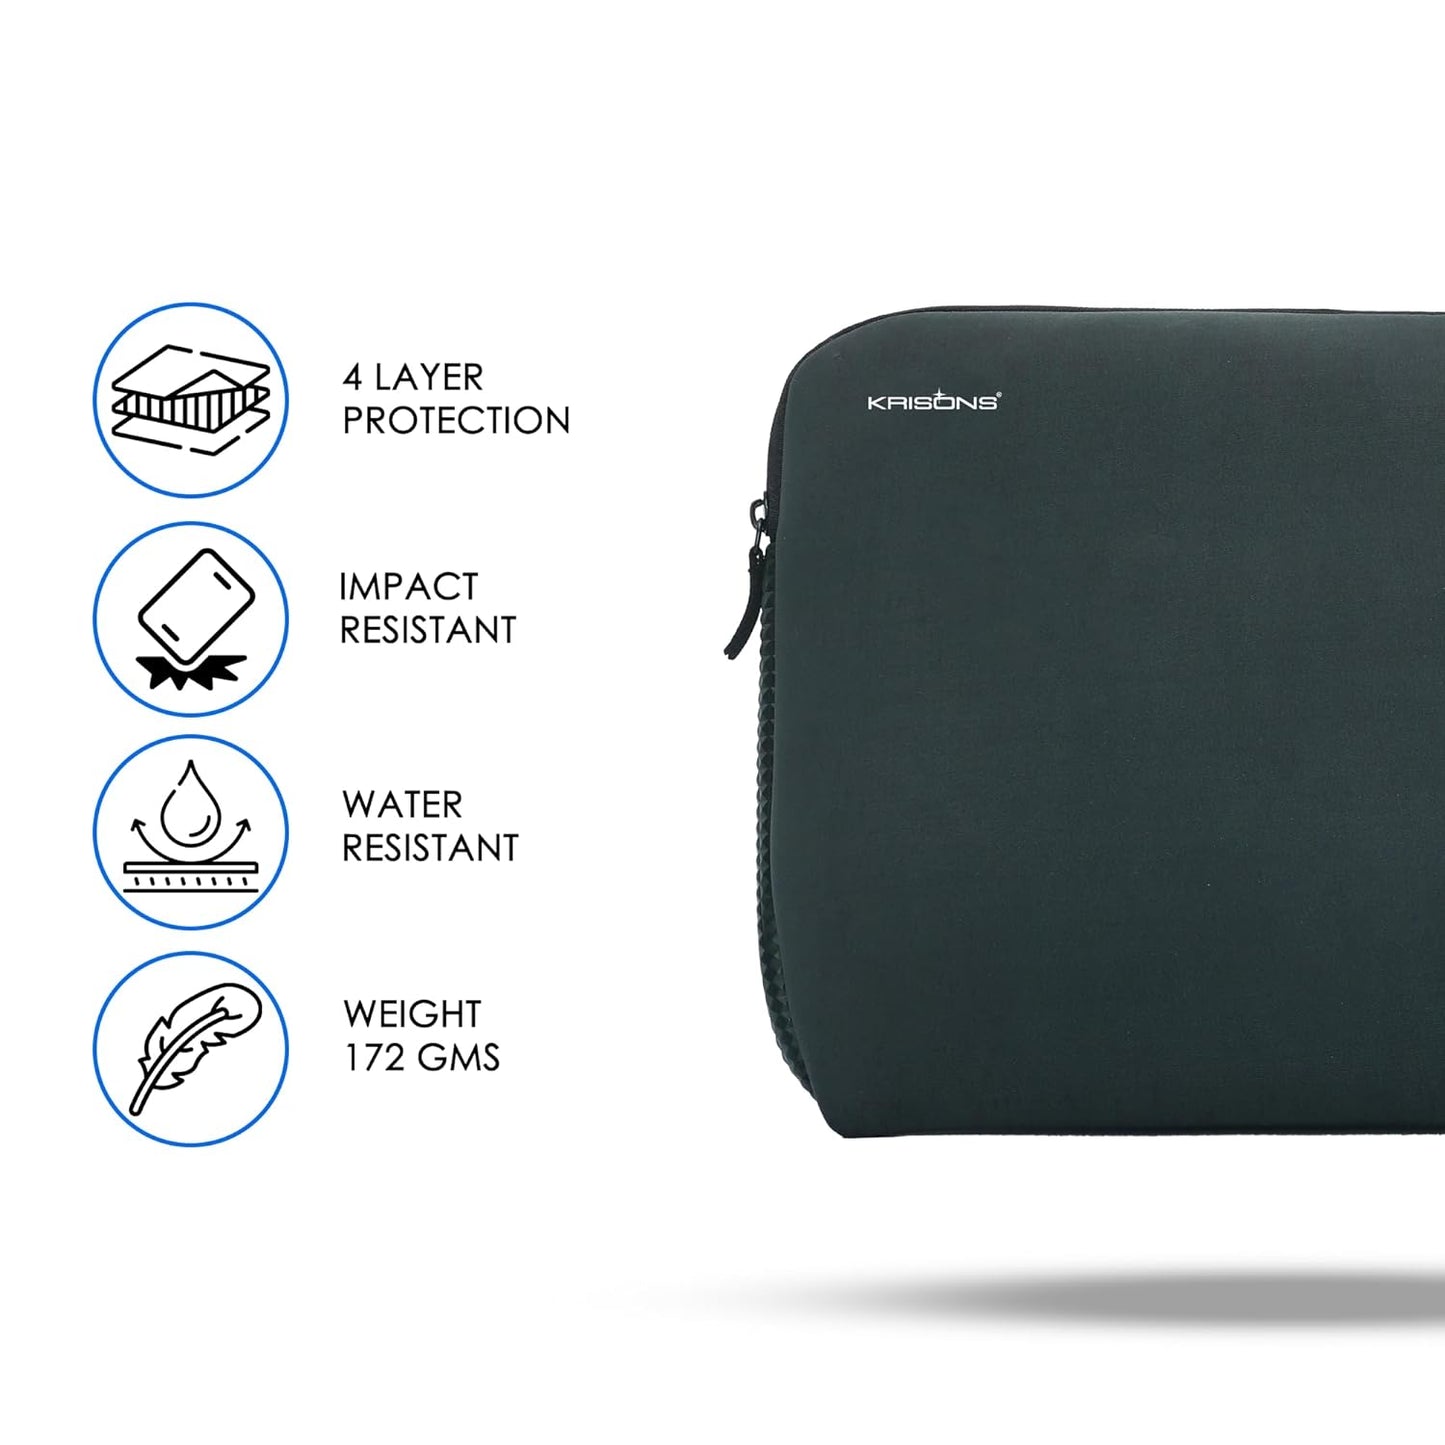 krisons Moonshadow Protective Laptop Sleeve fits Upto 15.6" Laptop/MacBook, Wrinkle Free, Padded, Water Resistant Light Neoprene case Cover Pouch, for Men & Women (Unisex)